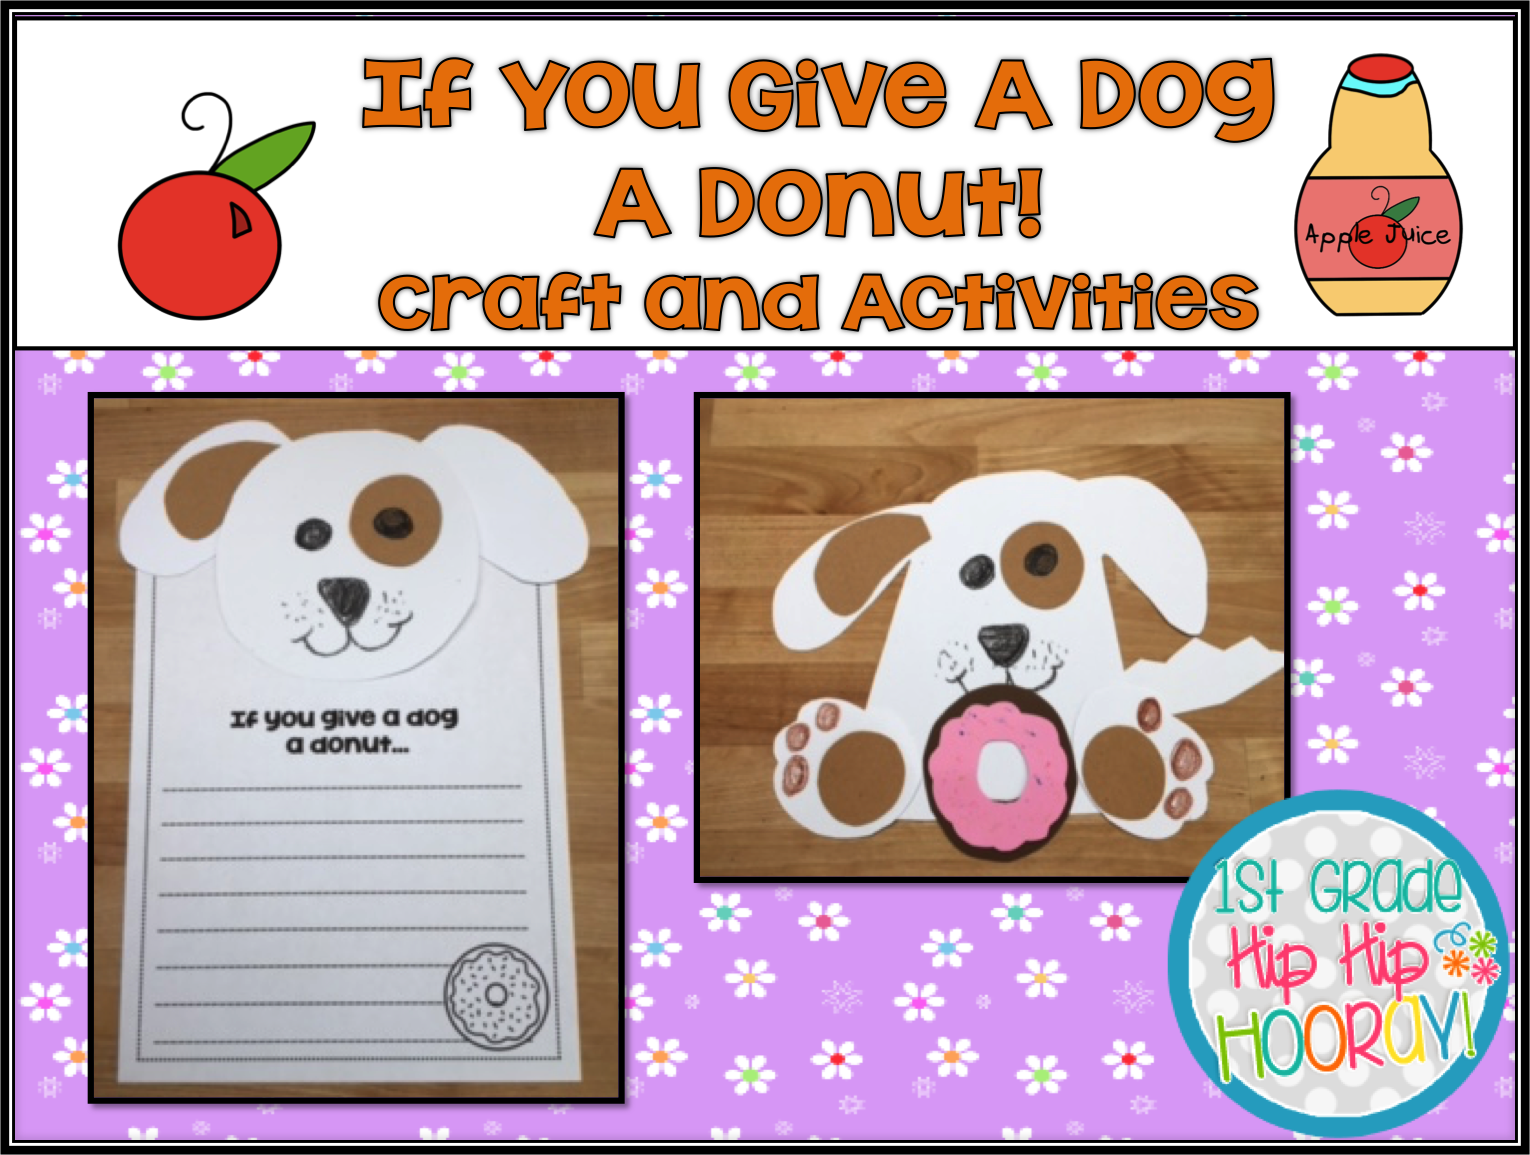 1st Grade Hip Hip Hooray If You Give A Dog A Donut 